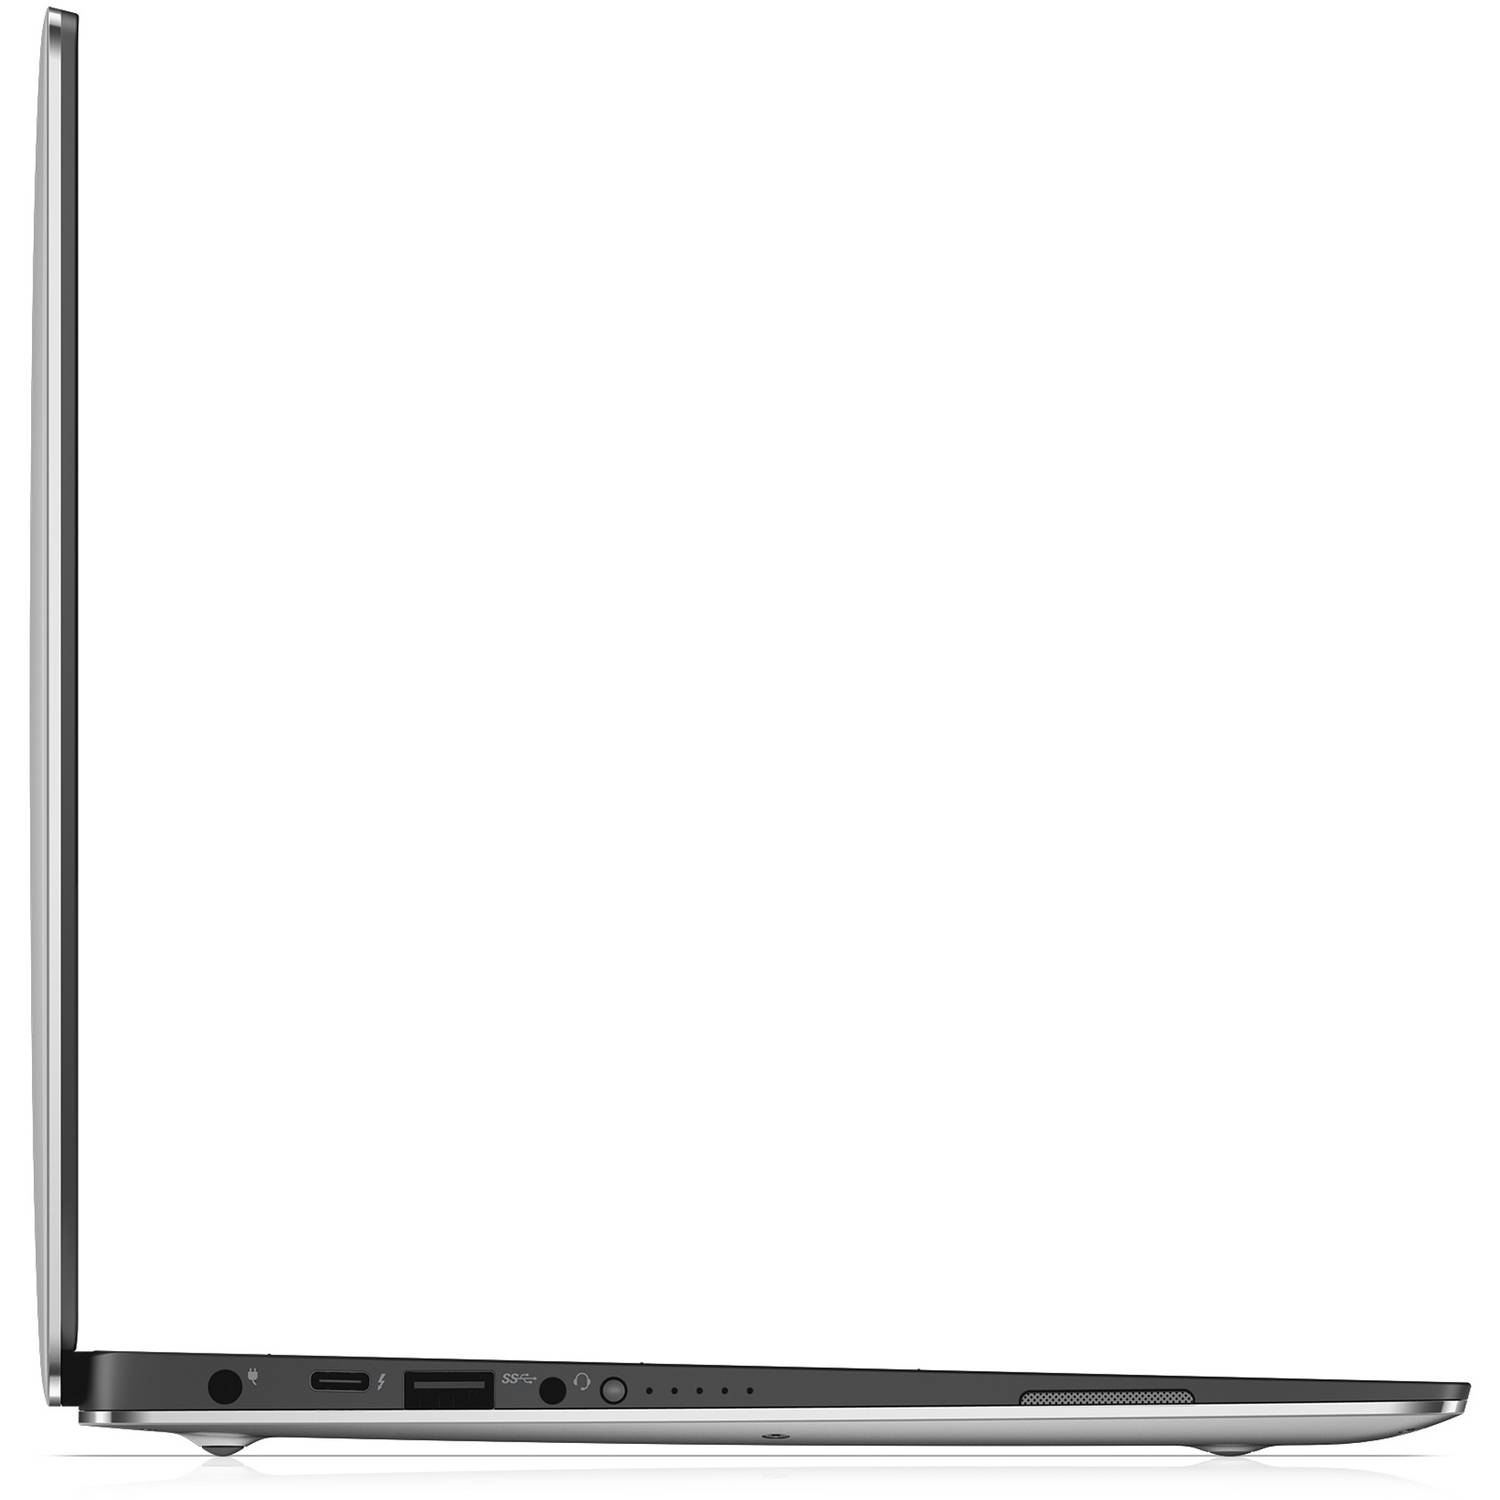 Dell XPS 13 9360 - Intel Core i5 - 7200U / up to 3.1 GHz - Win 10 Home 64-bit - HD Graphics 620 - 8 GB RAM - 256 GB SSD - 13.3" touchscreen 3200 x 1800 (QHD+) - Wi-Fi 5 - silver - kbd: English - with 1 Year Hardware Service with Onsite/In-Home Service After Remote Diagnosis - image 5 of 25